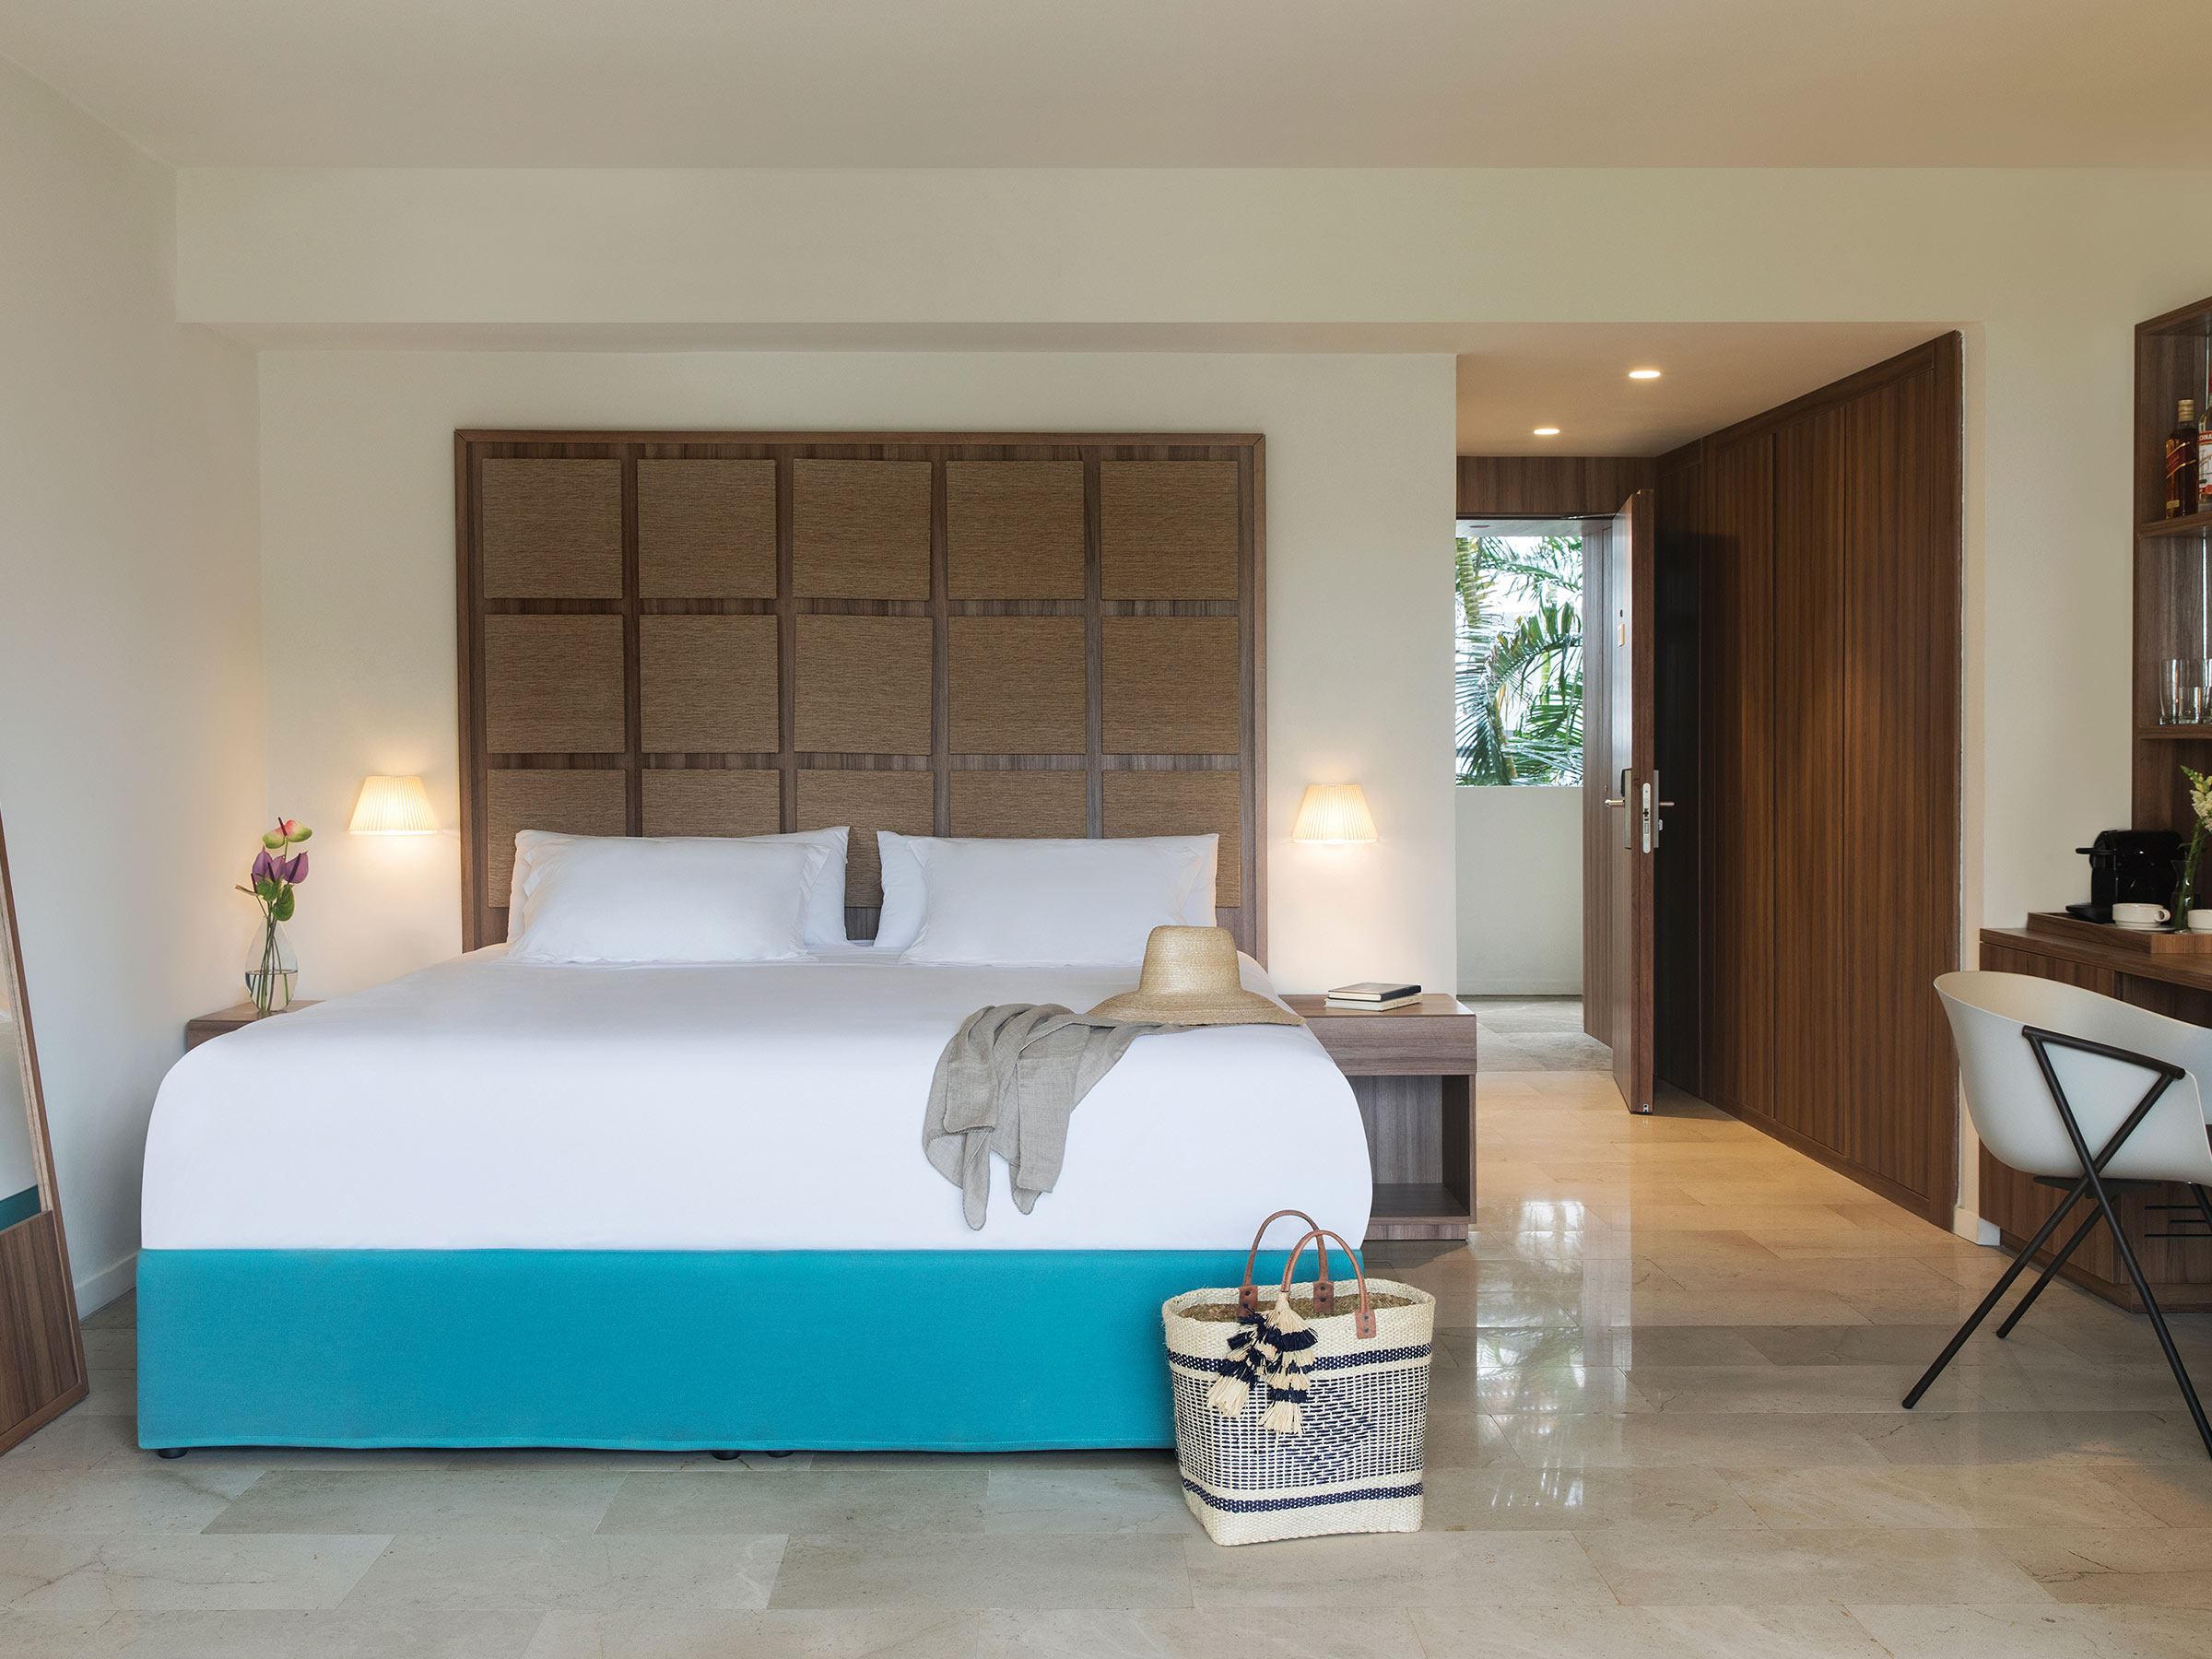 Upscale Amenities and Services in Our Punta Cana Suites